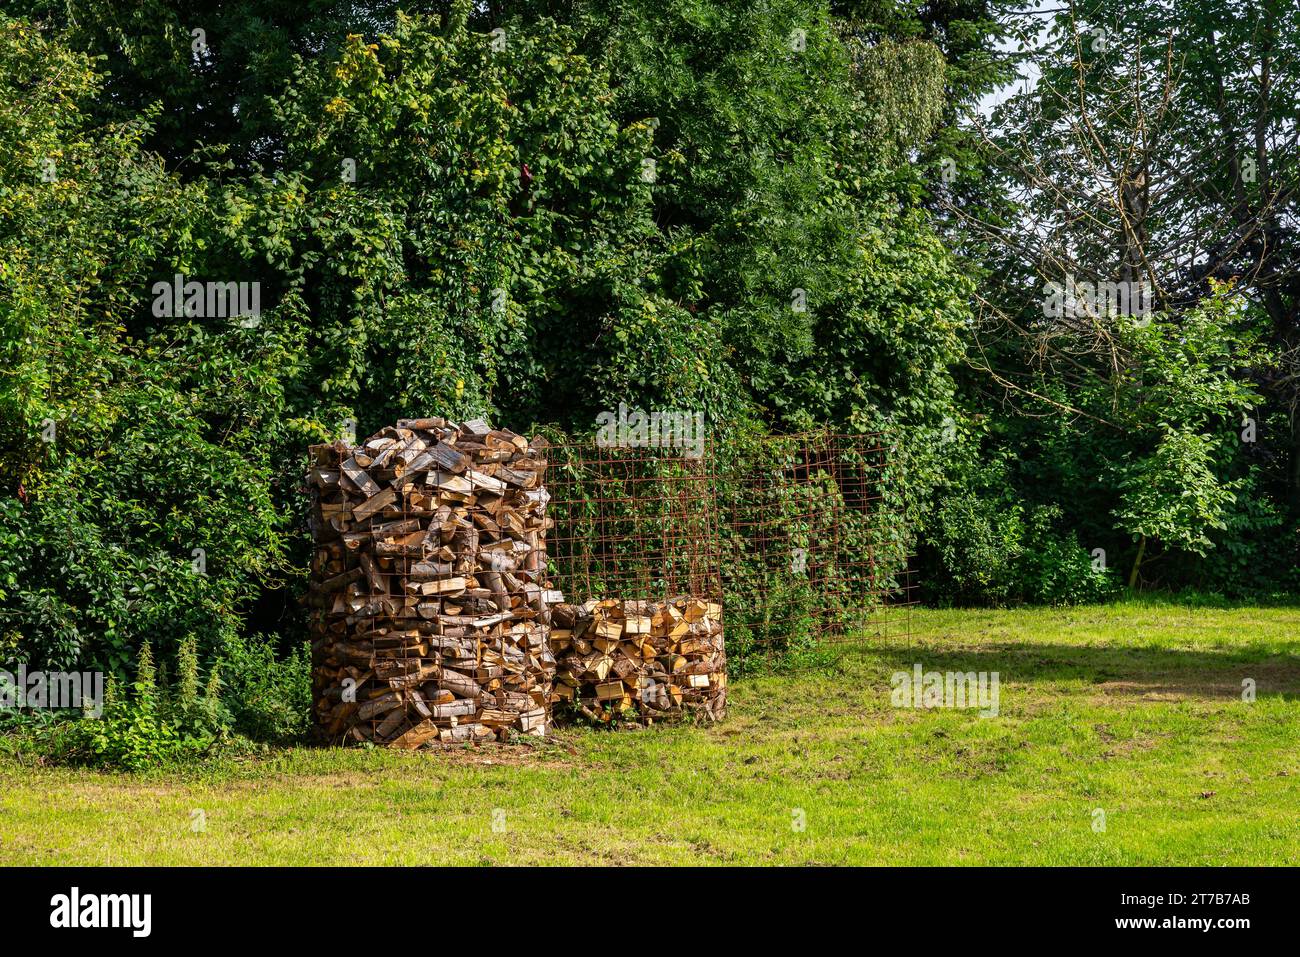 Harvested firewood fenced off with a metal grate at the edge of the forest. Green trees in the background. Stock Photo